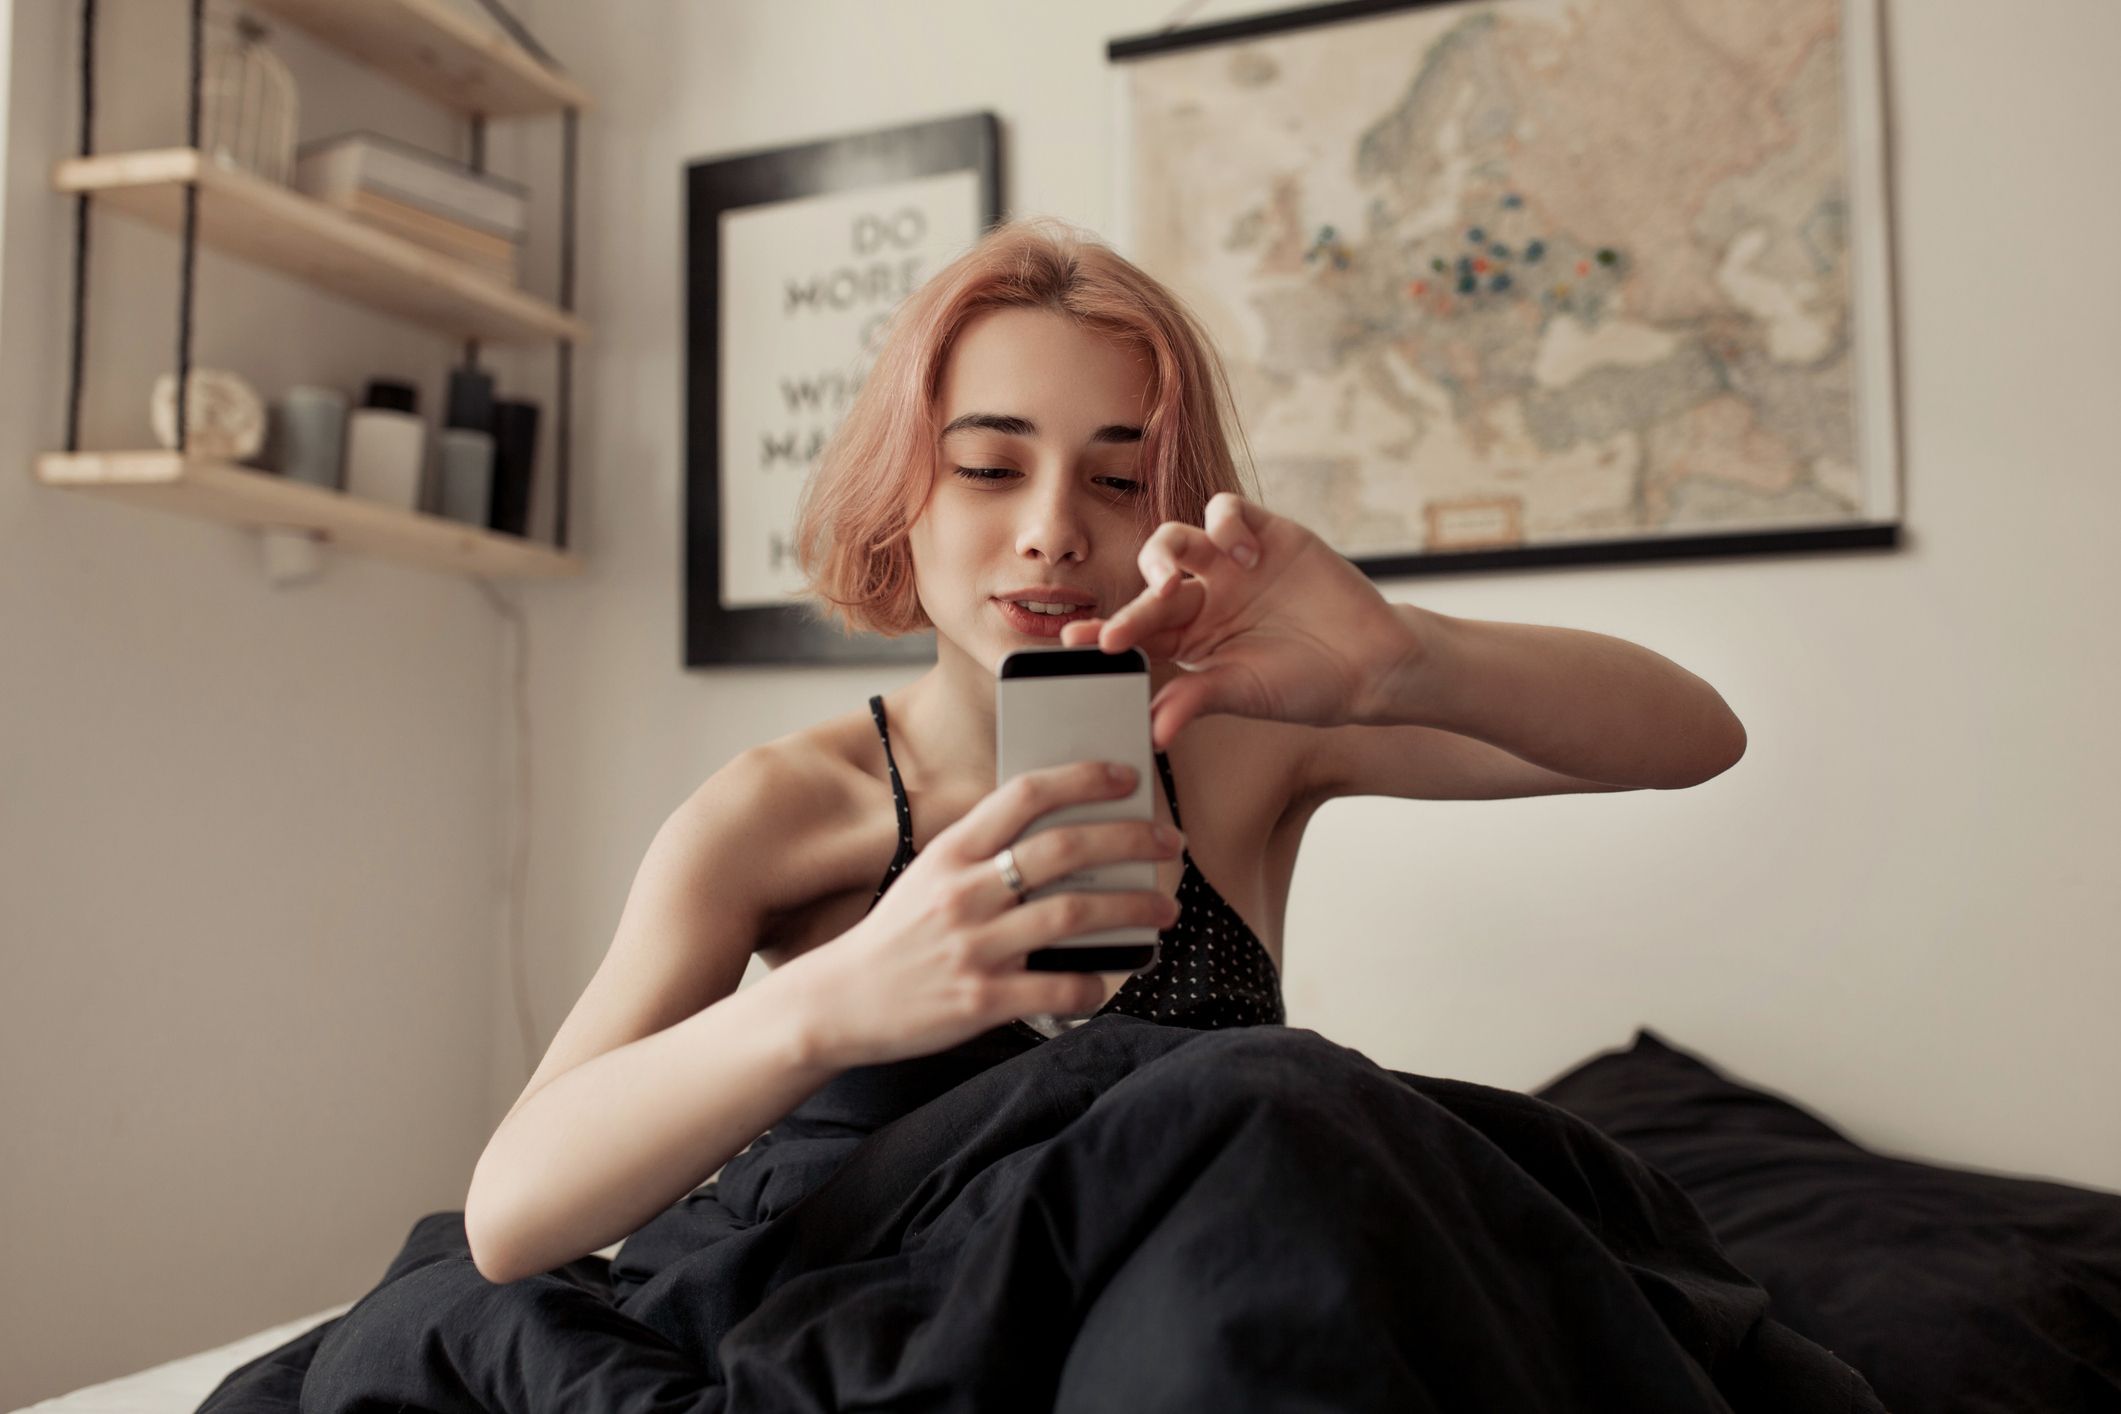 Here's How to Sext on Snapchat Like a Pro - Tips on Snapchat Sexting